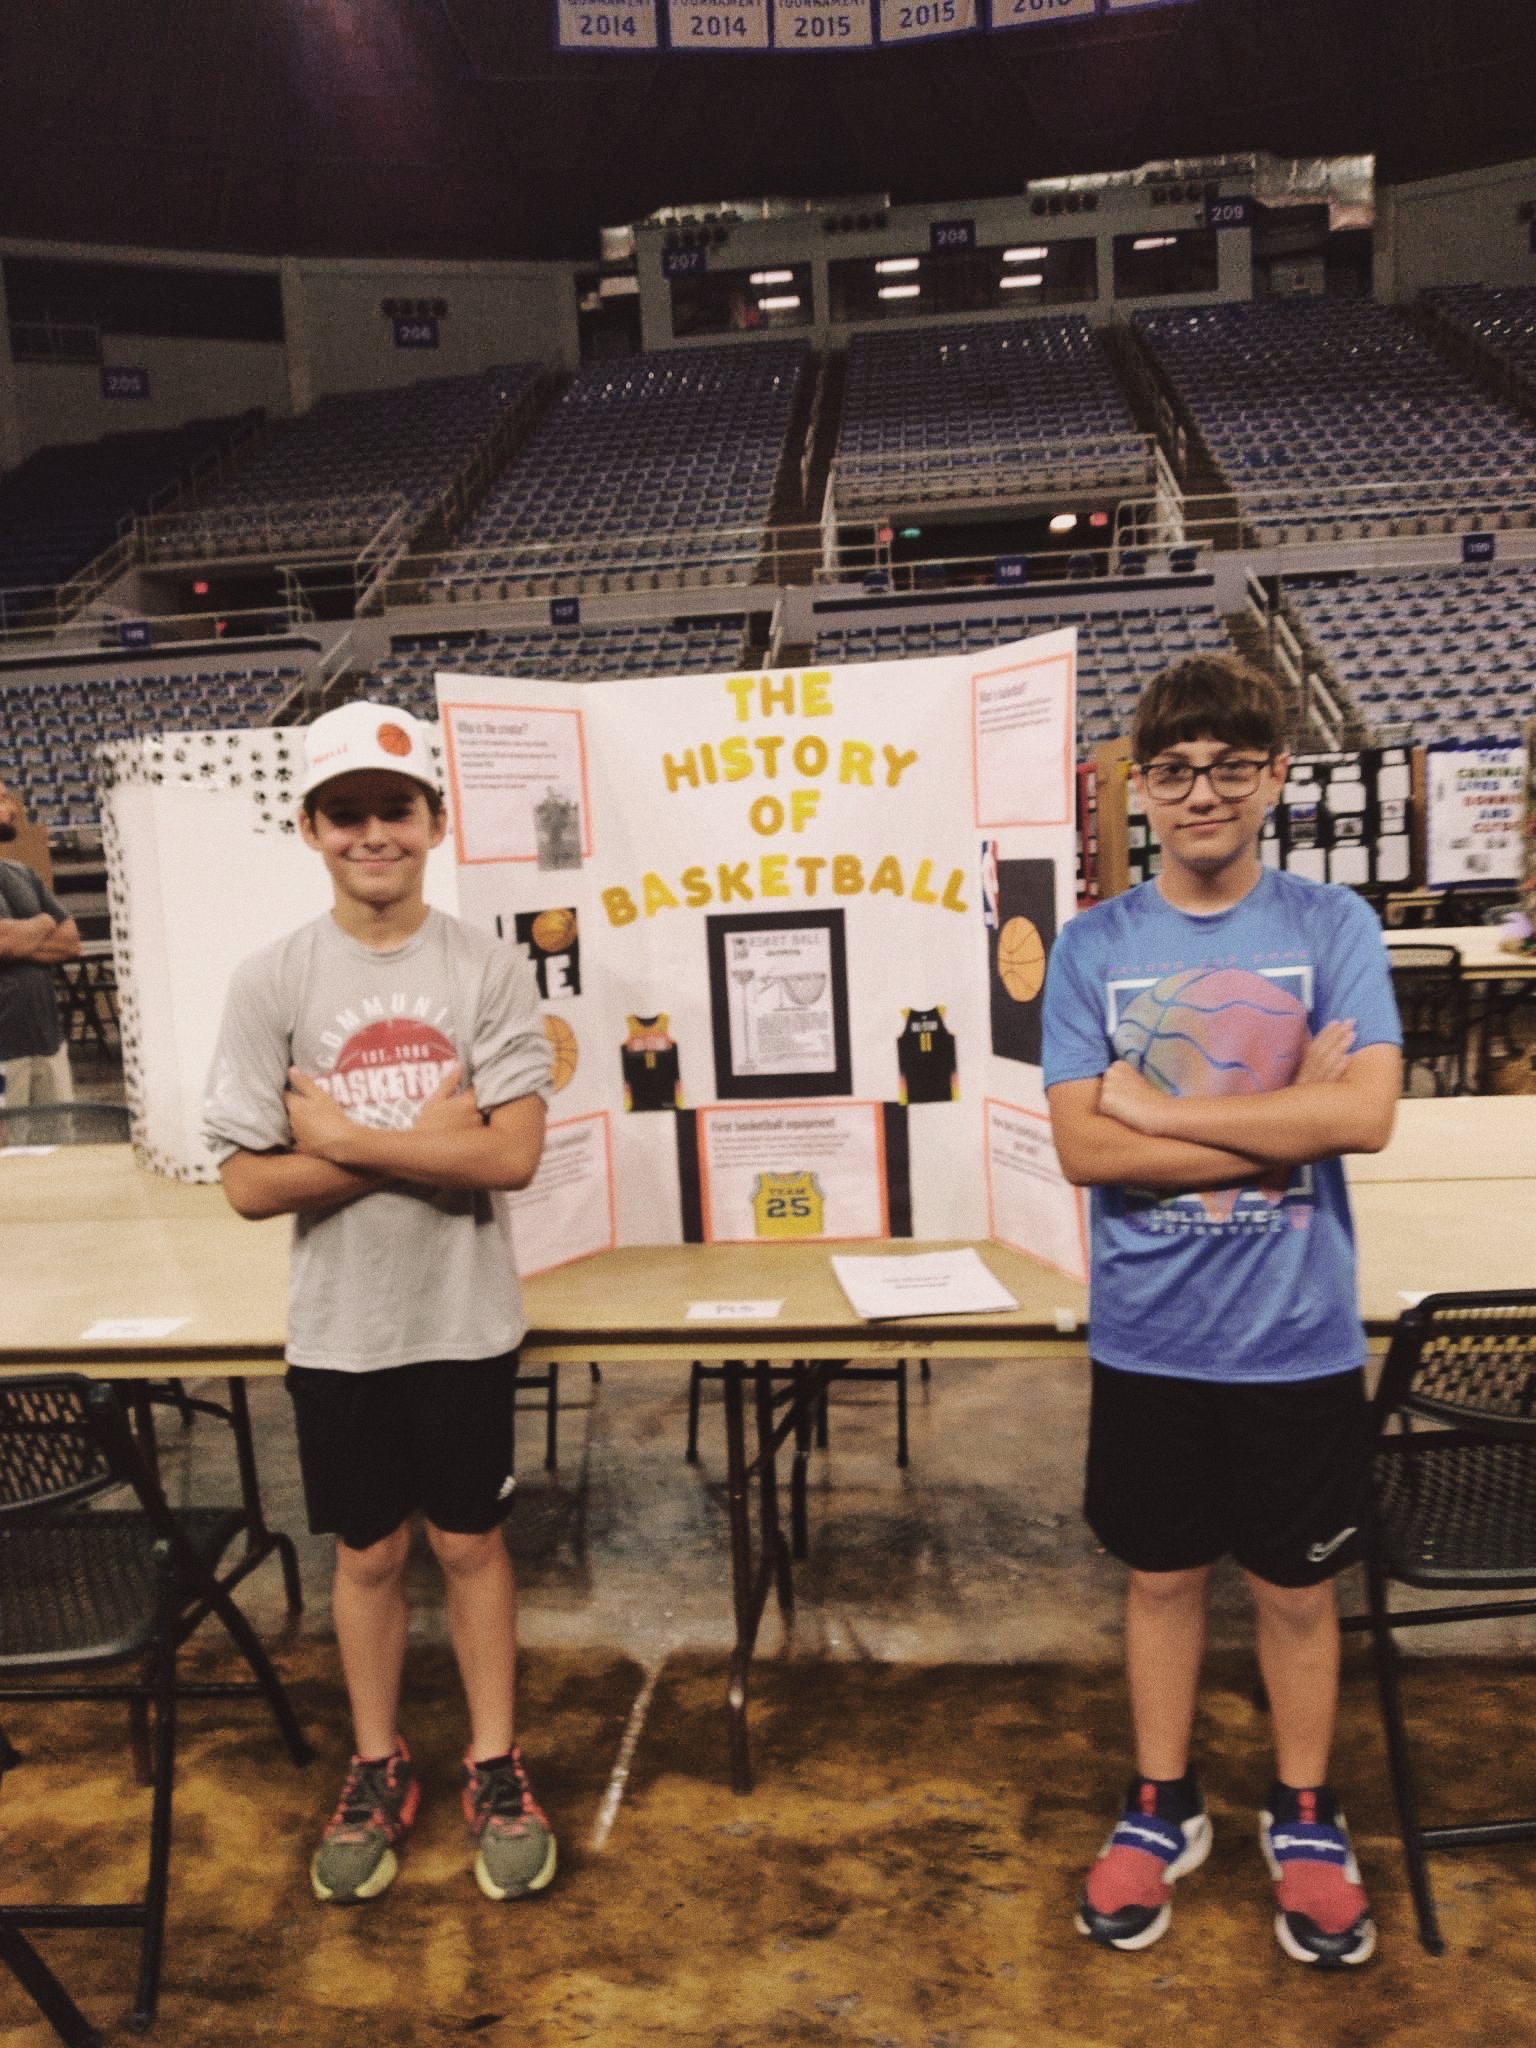   Pierre Part Elementary 5th graders Daiten Breaux and Saul Oullette won fifth place at the 2023 Louisiana Social Studies Fair for their presentation on the history of basketball.  